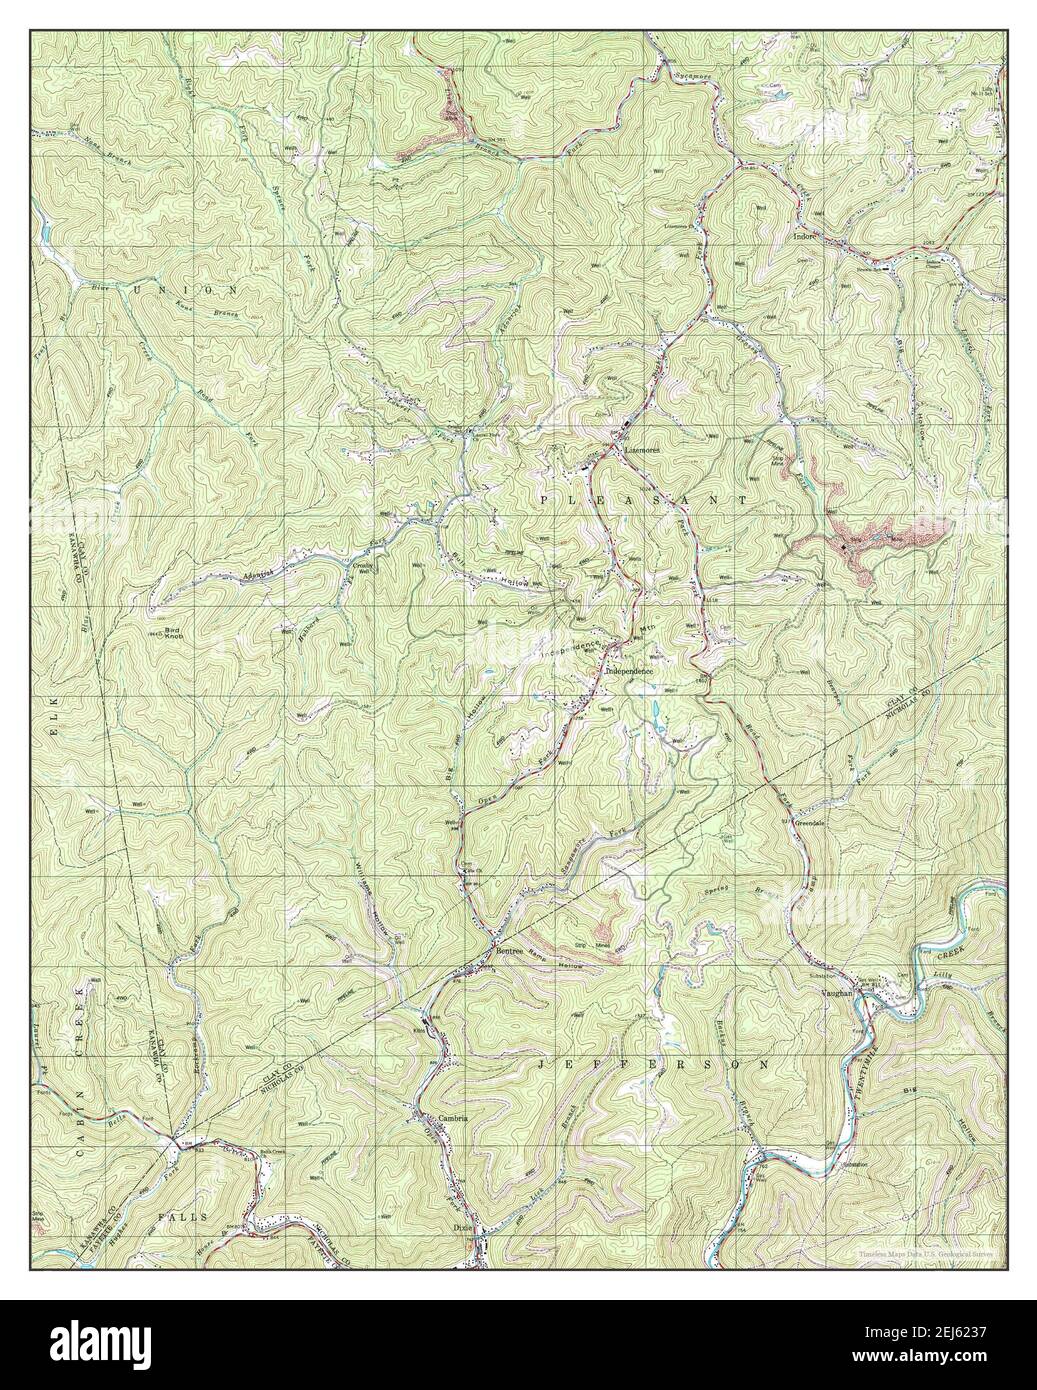 Bentree, West Virginia, map 1996, 1:24000, United States of America by Timeless Maps, data U.S. Geological Survey Stock Photo